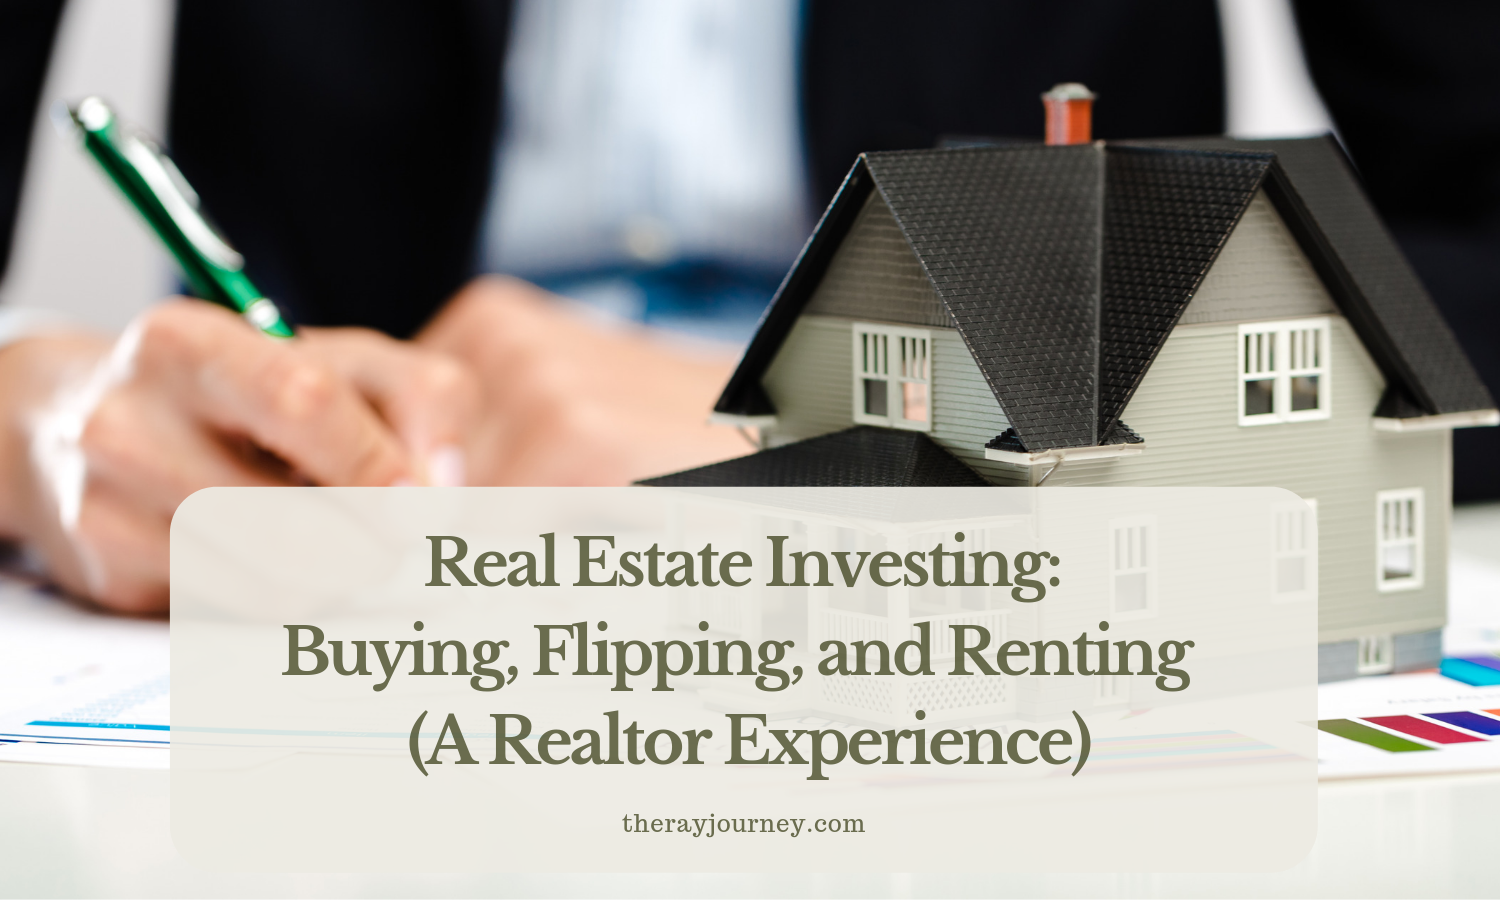 Real Estate Investing: Buying, Flipping, and Renting (A Realtor Experience)